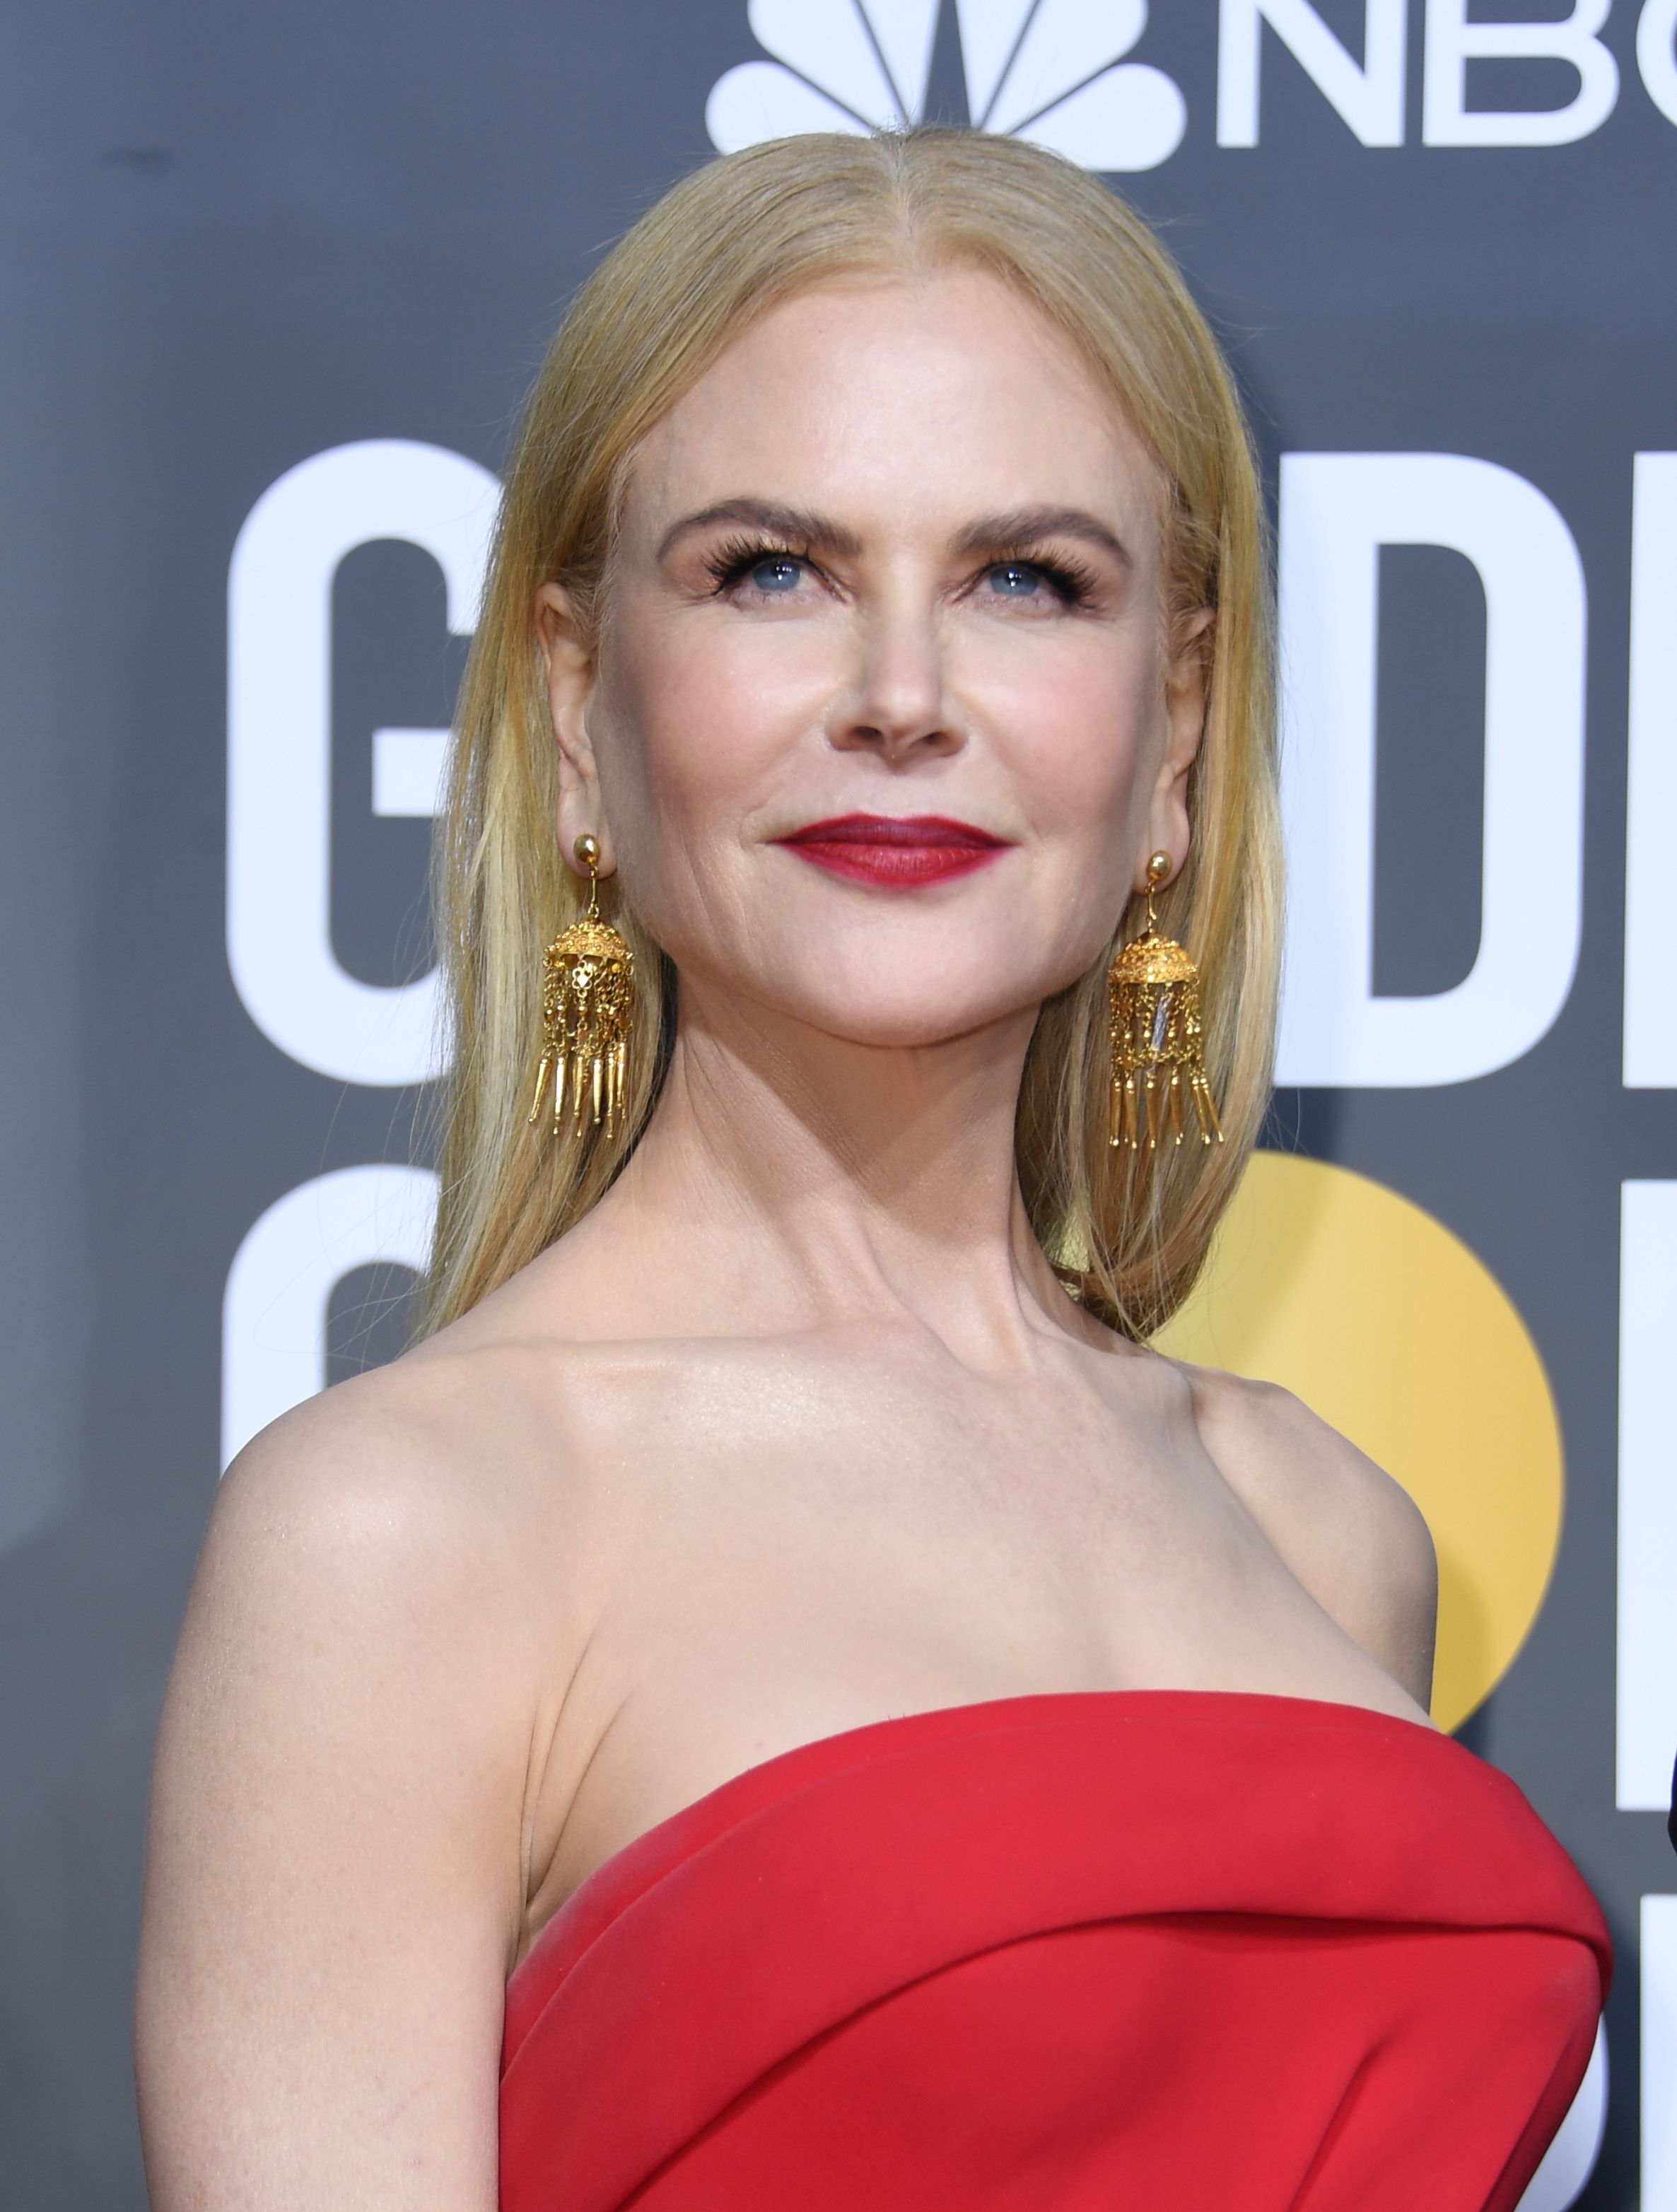 Nicole Kidman at the 77th annual Golden Globe Awards in January, 2020, in Beverly Hills, California. | Getty Images